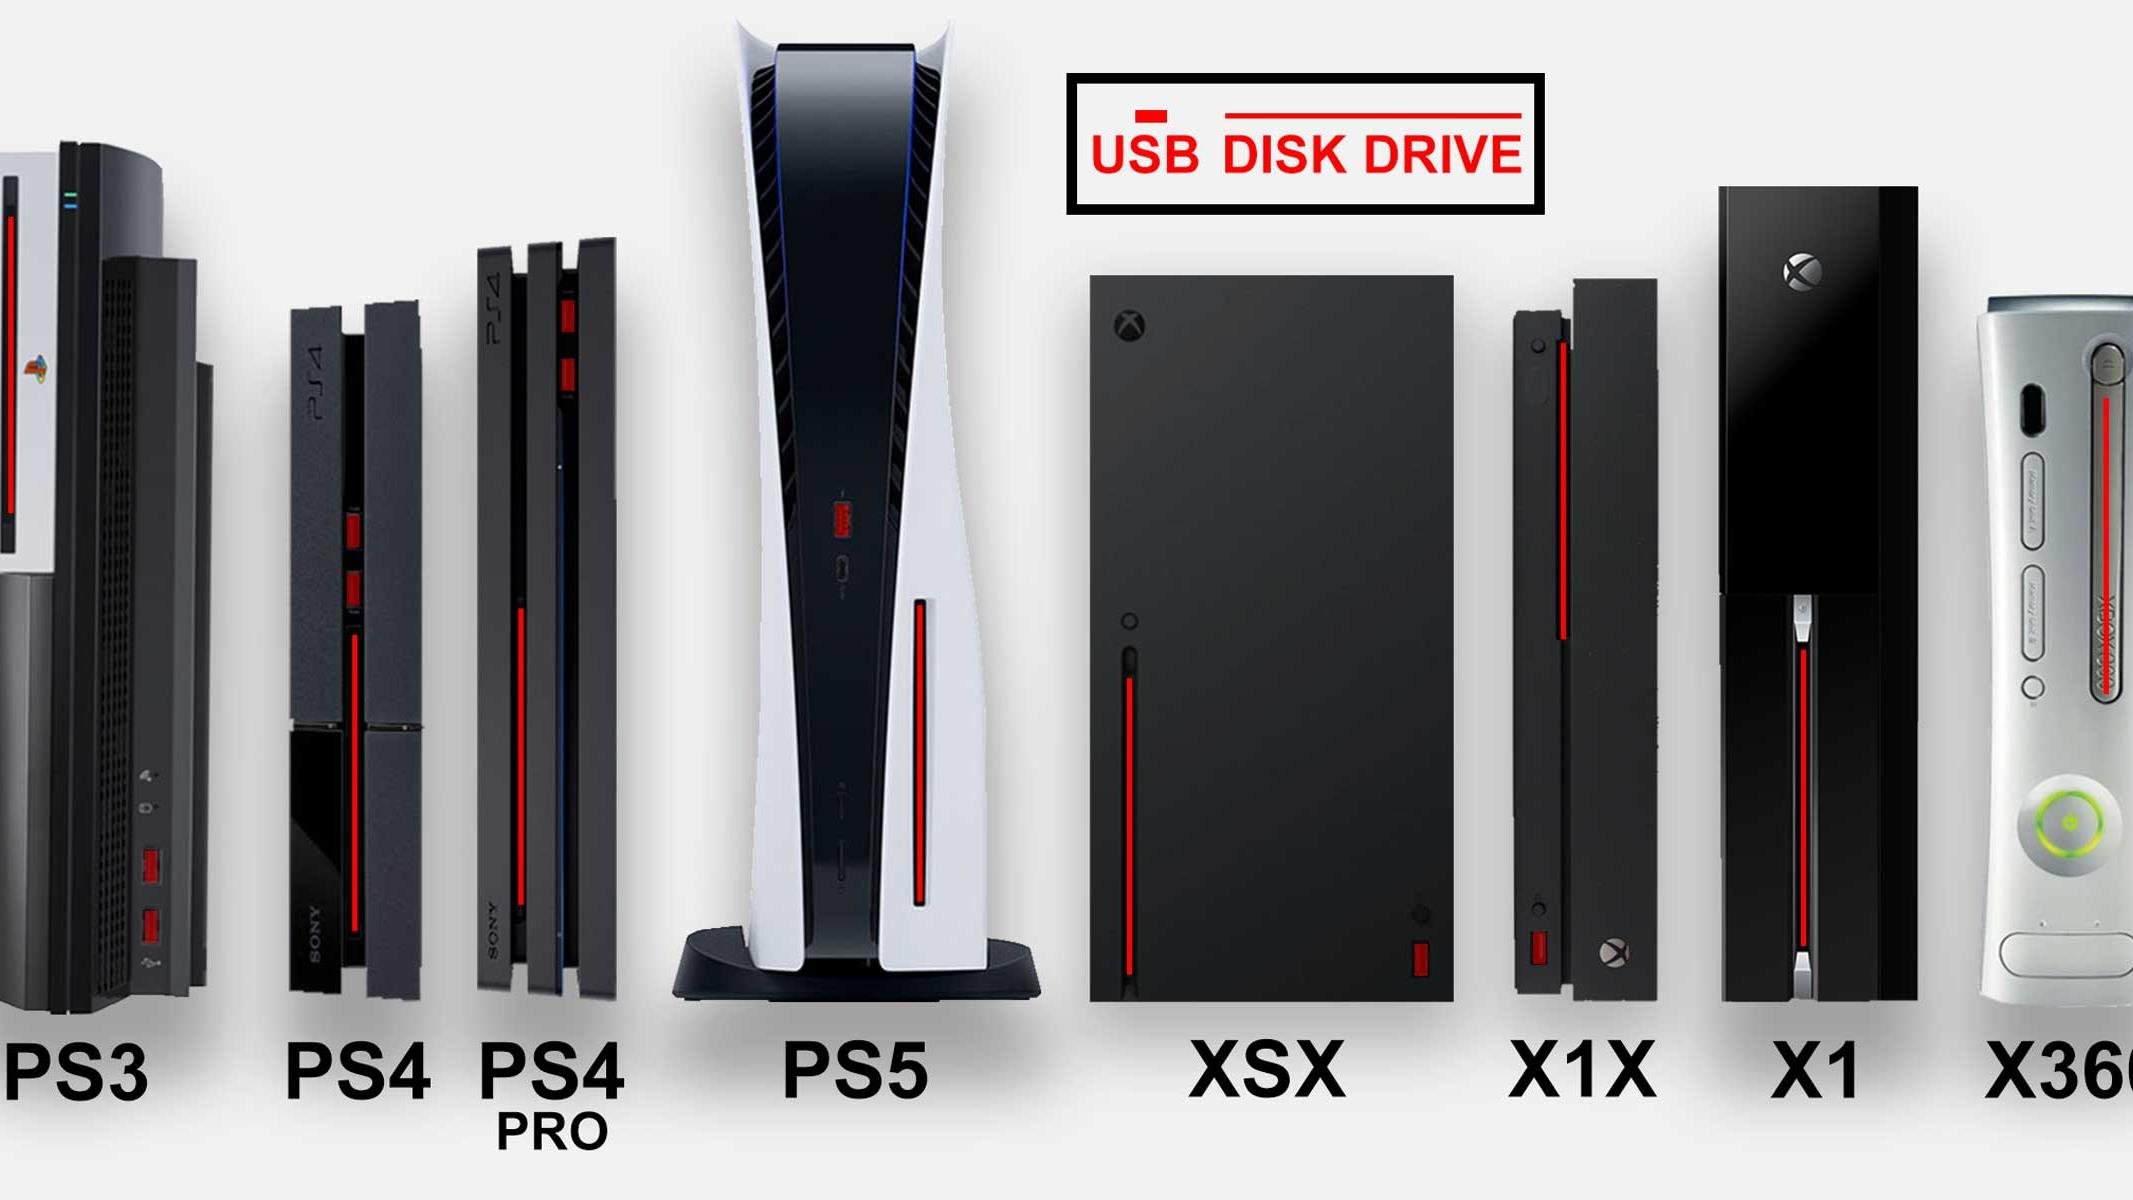 Sony PlayStation 5 What An Overgrown Console Beast It Is In This Comparison Photo | HotHardware